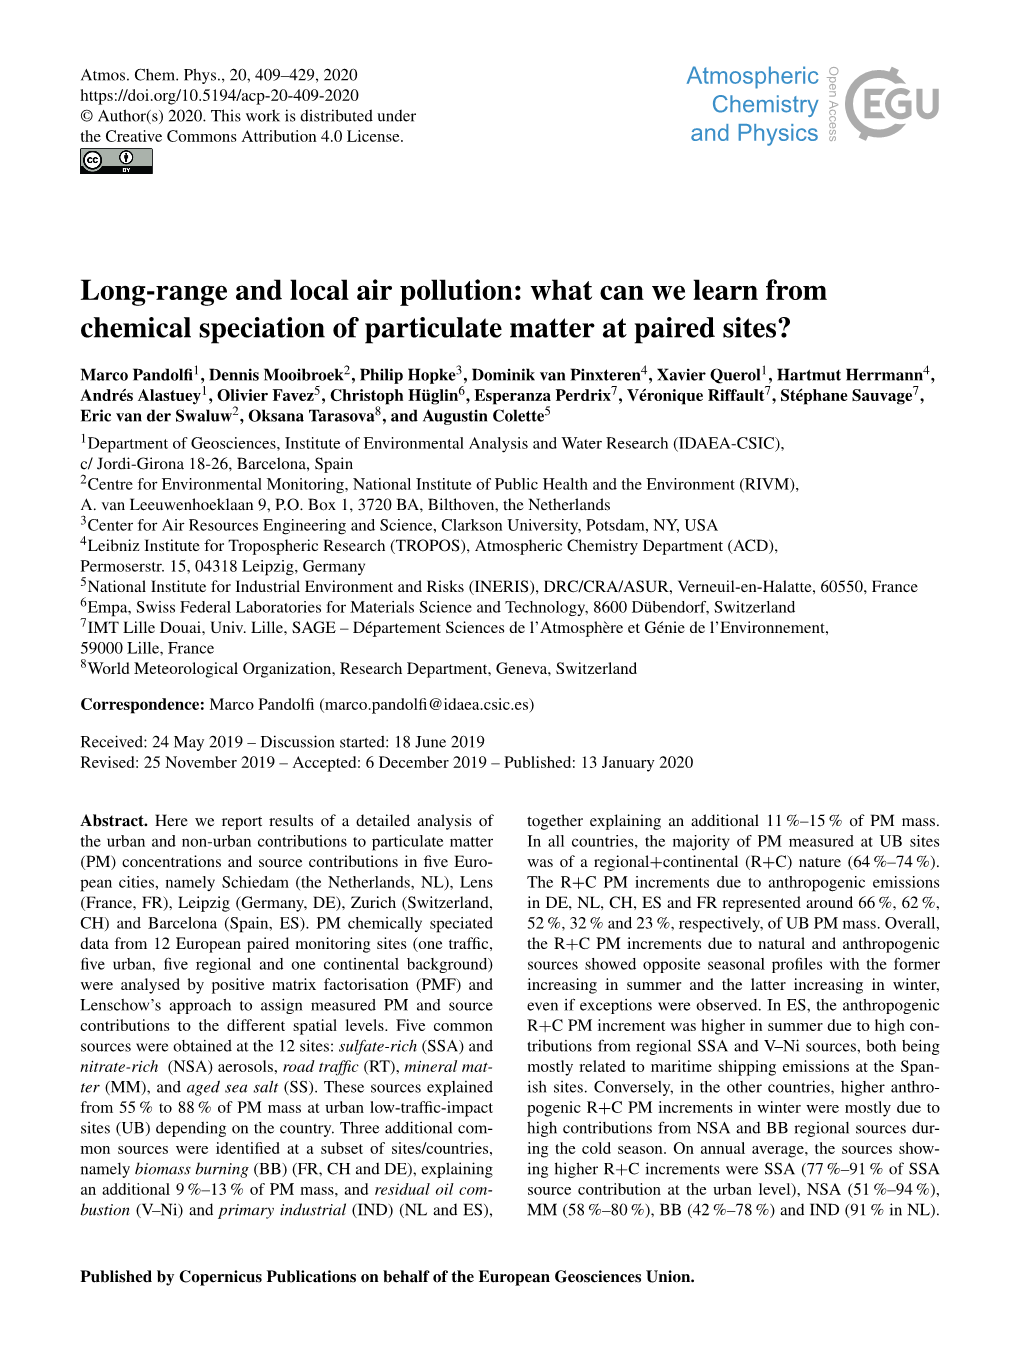 Long-Range and Local Air Pollution: What Can We Learn from Chemical Speciation of Particulate Matter at Paired Sites?